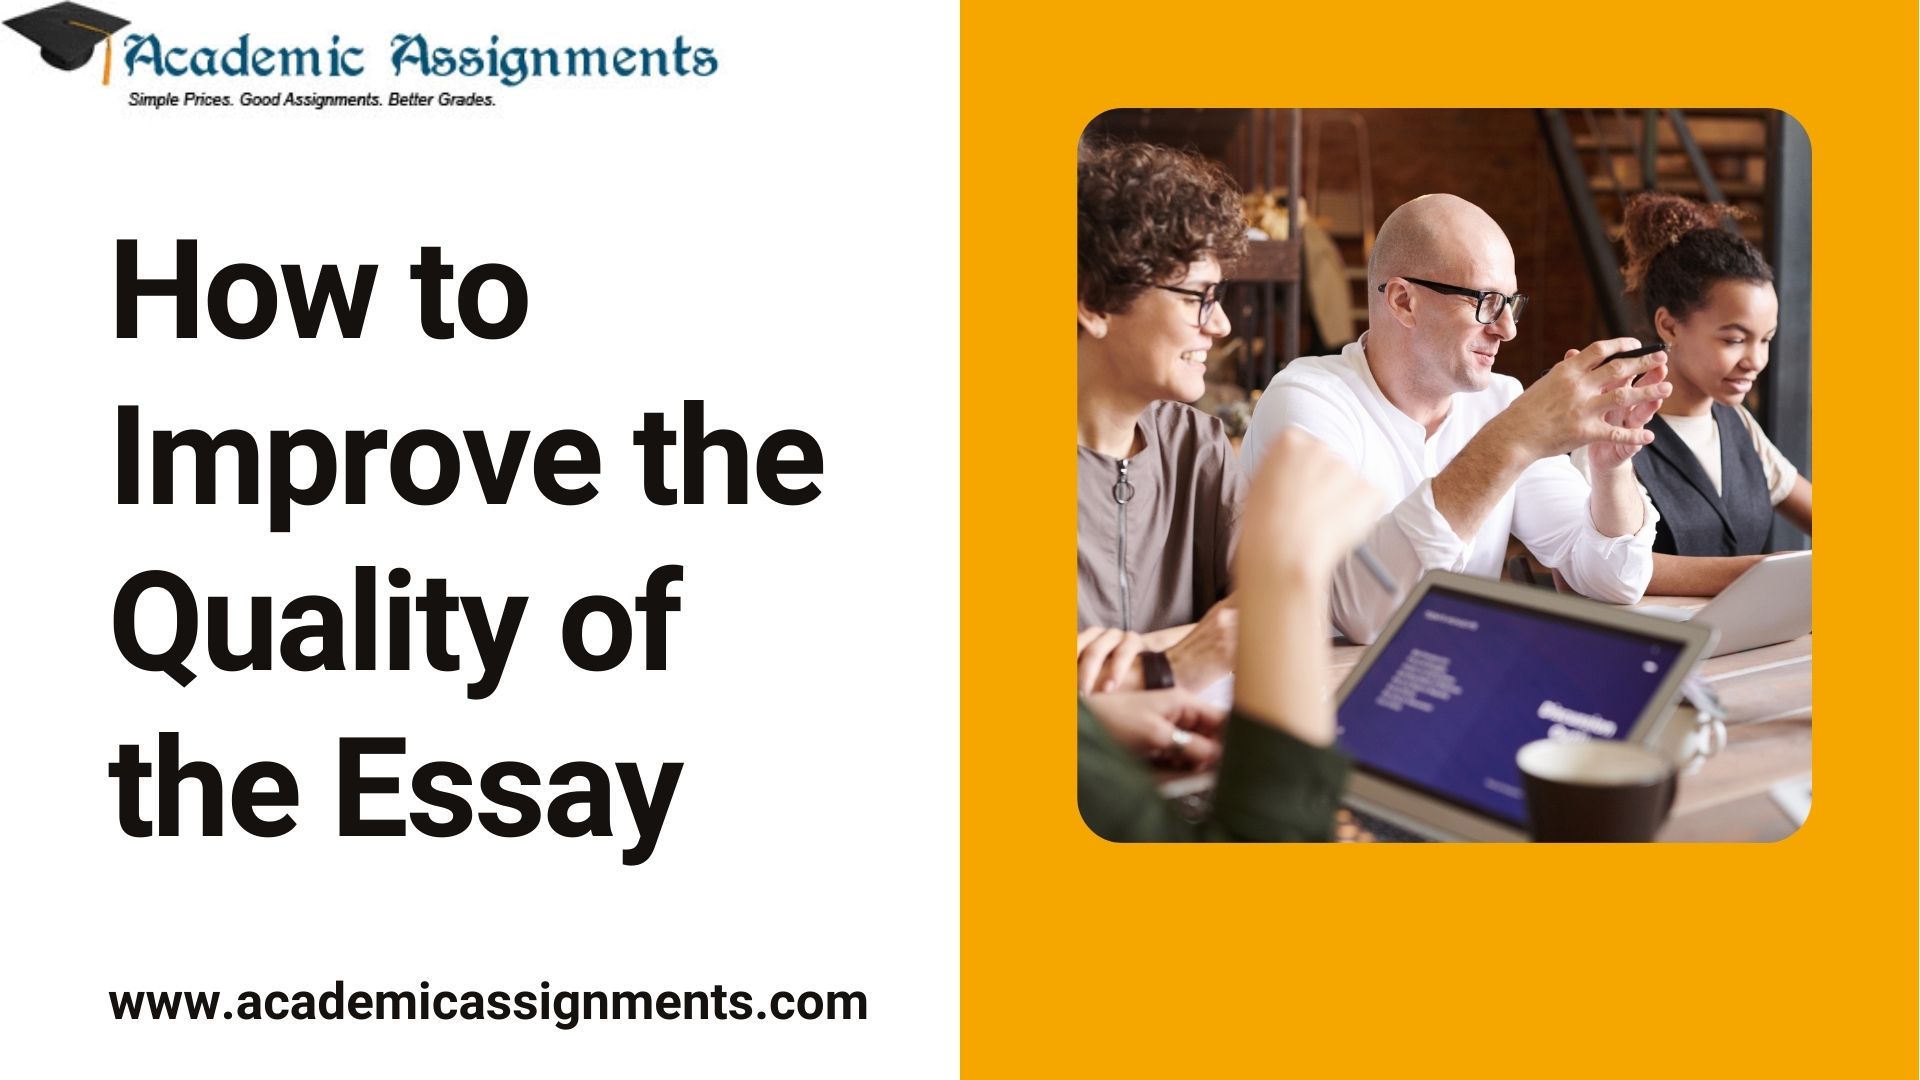 How to Improve the Quality of the Essay